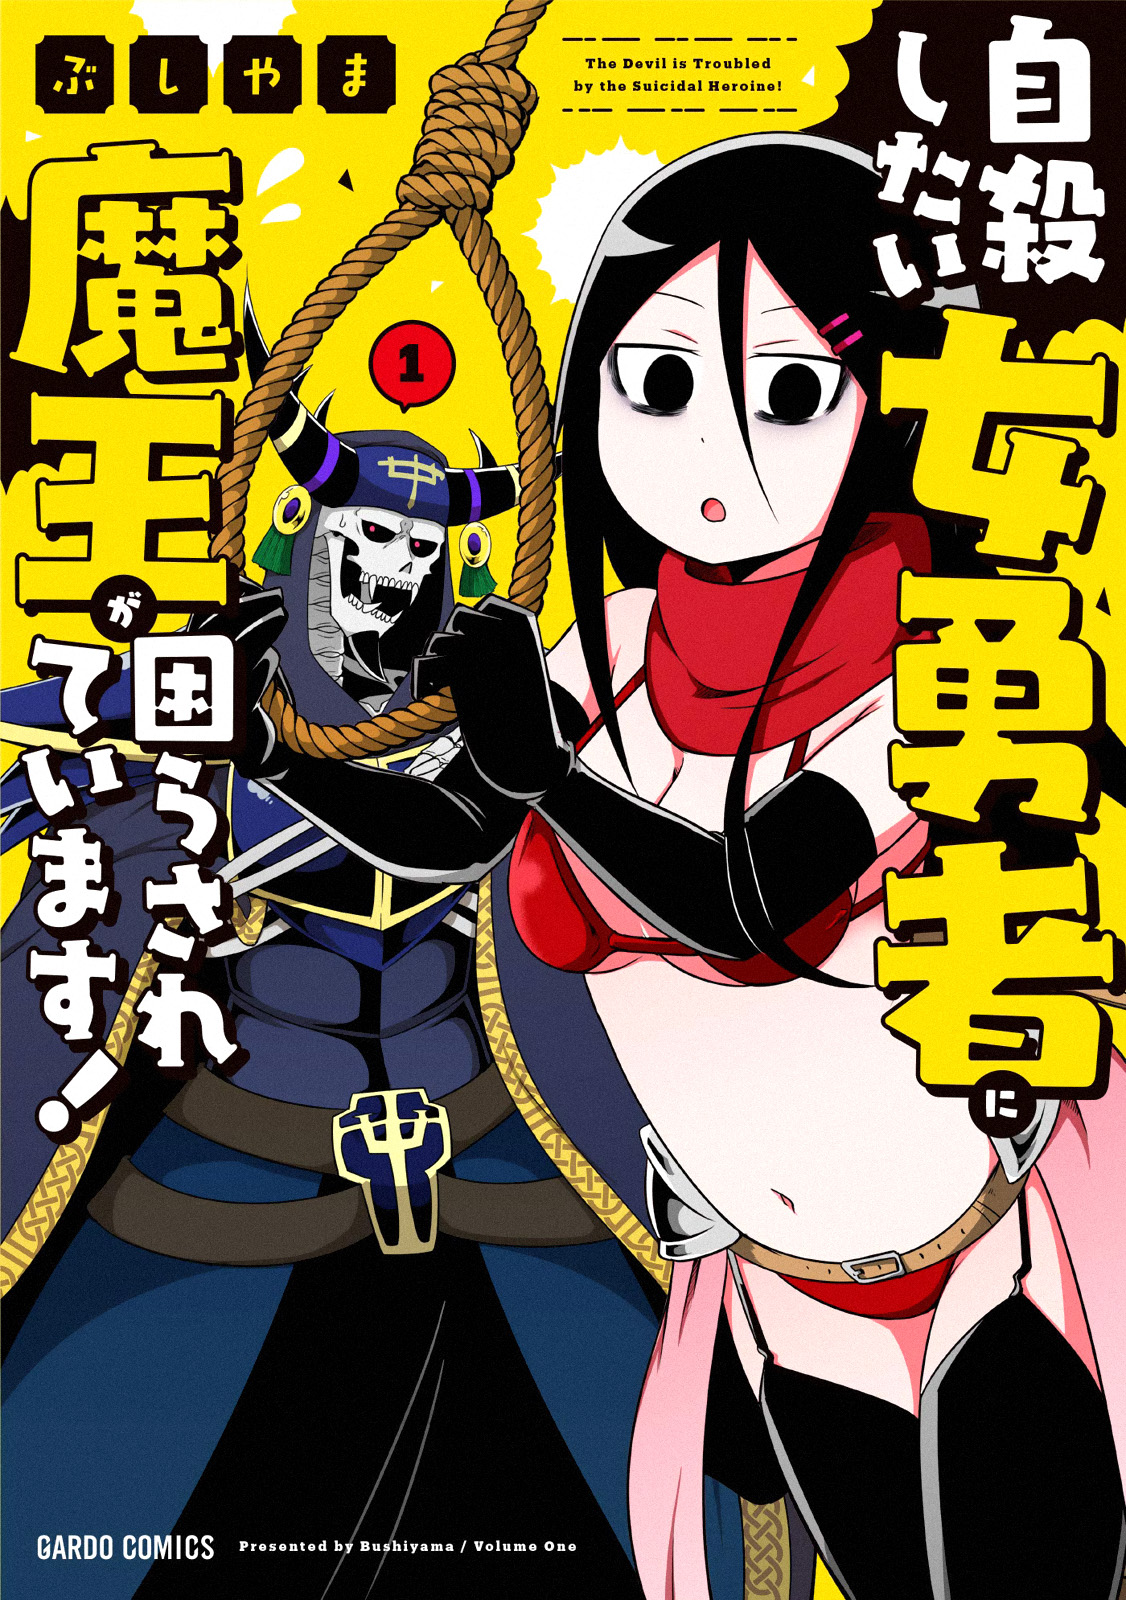 The Devil is Troubled by the Suicidal Heroine Manga